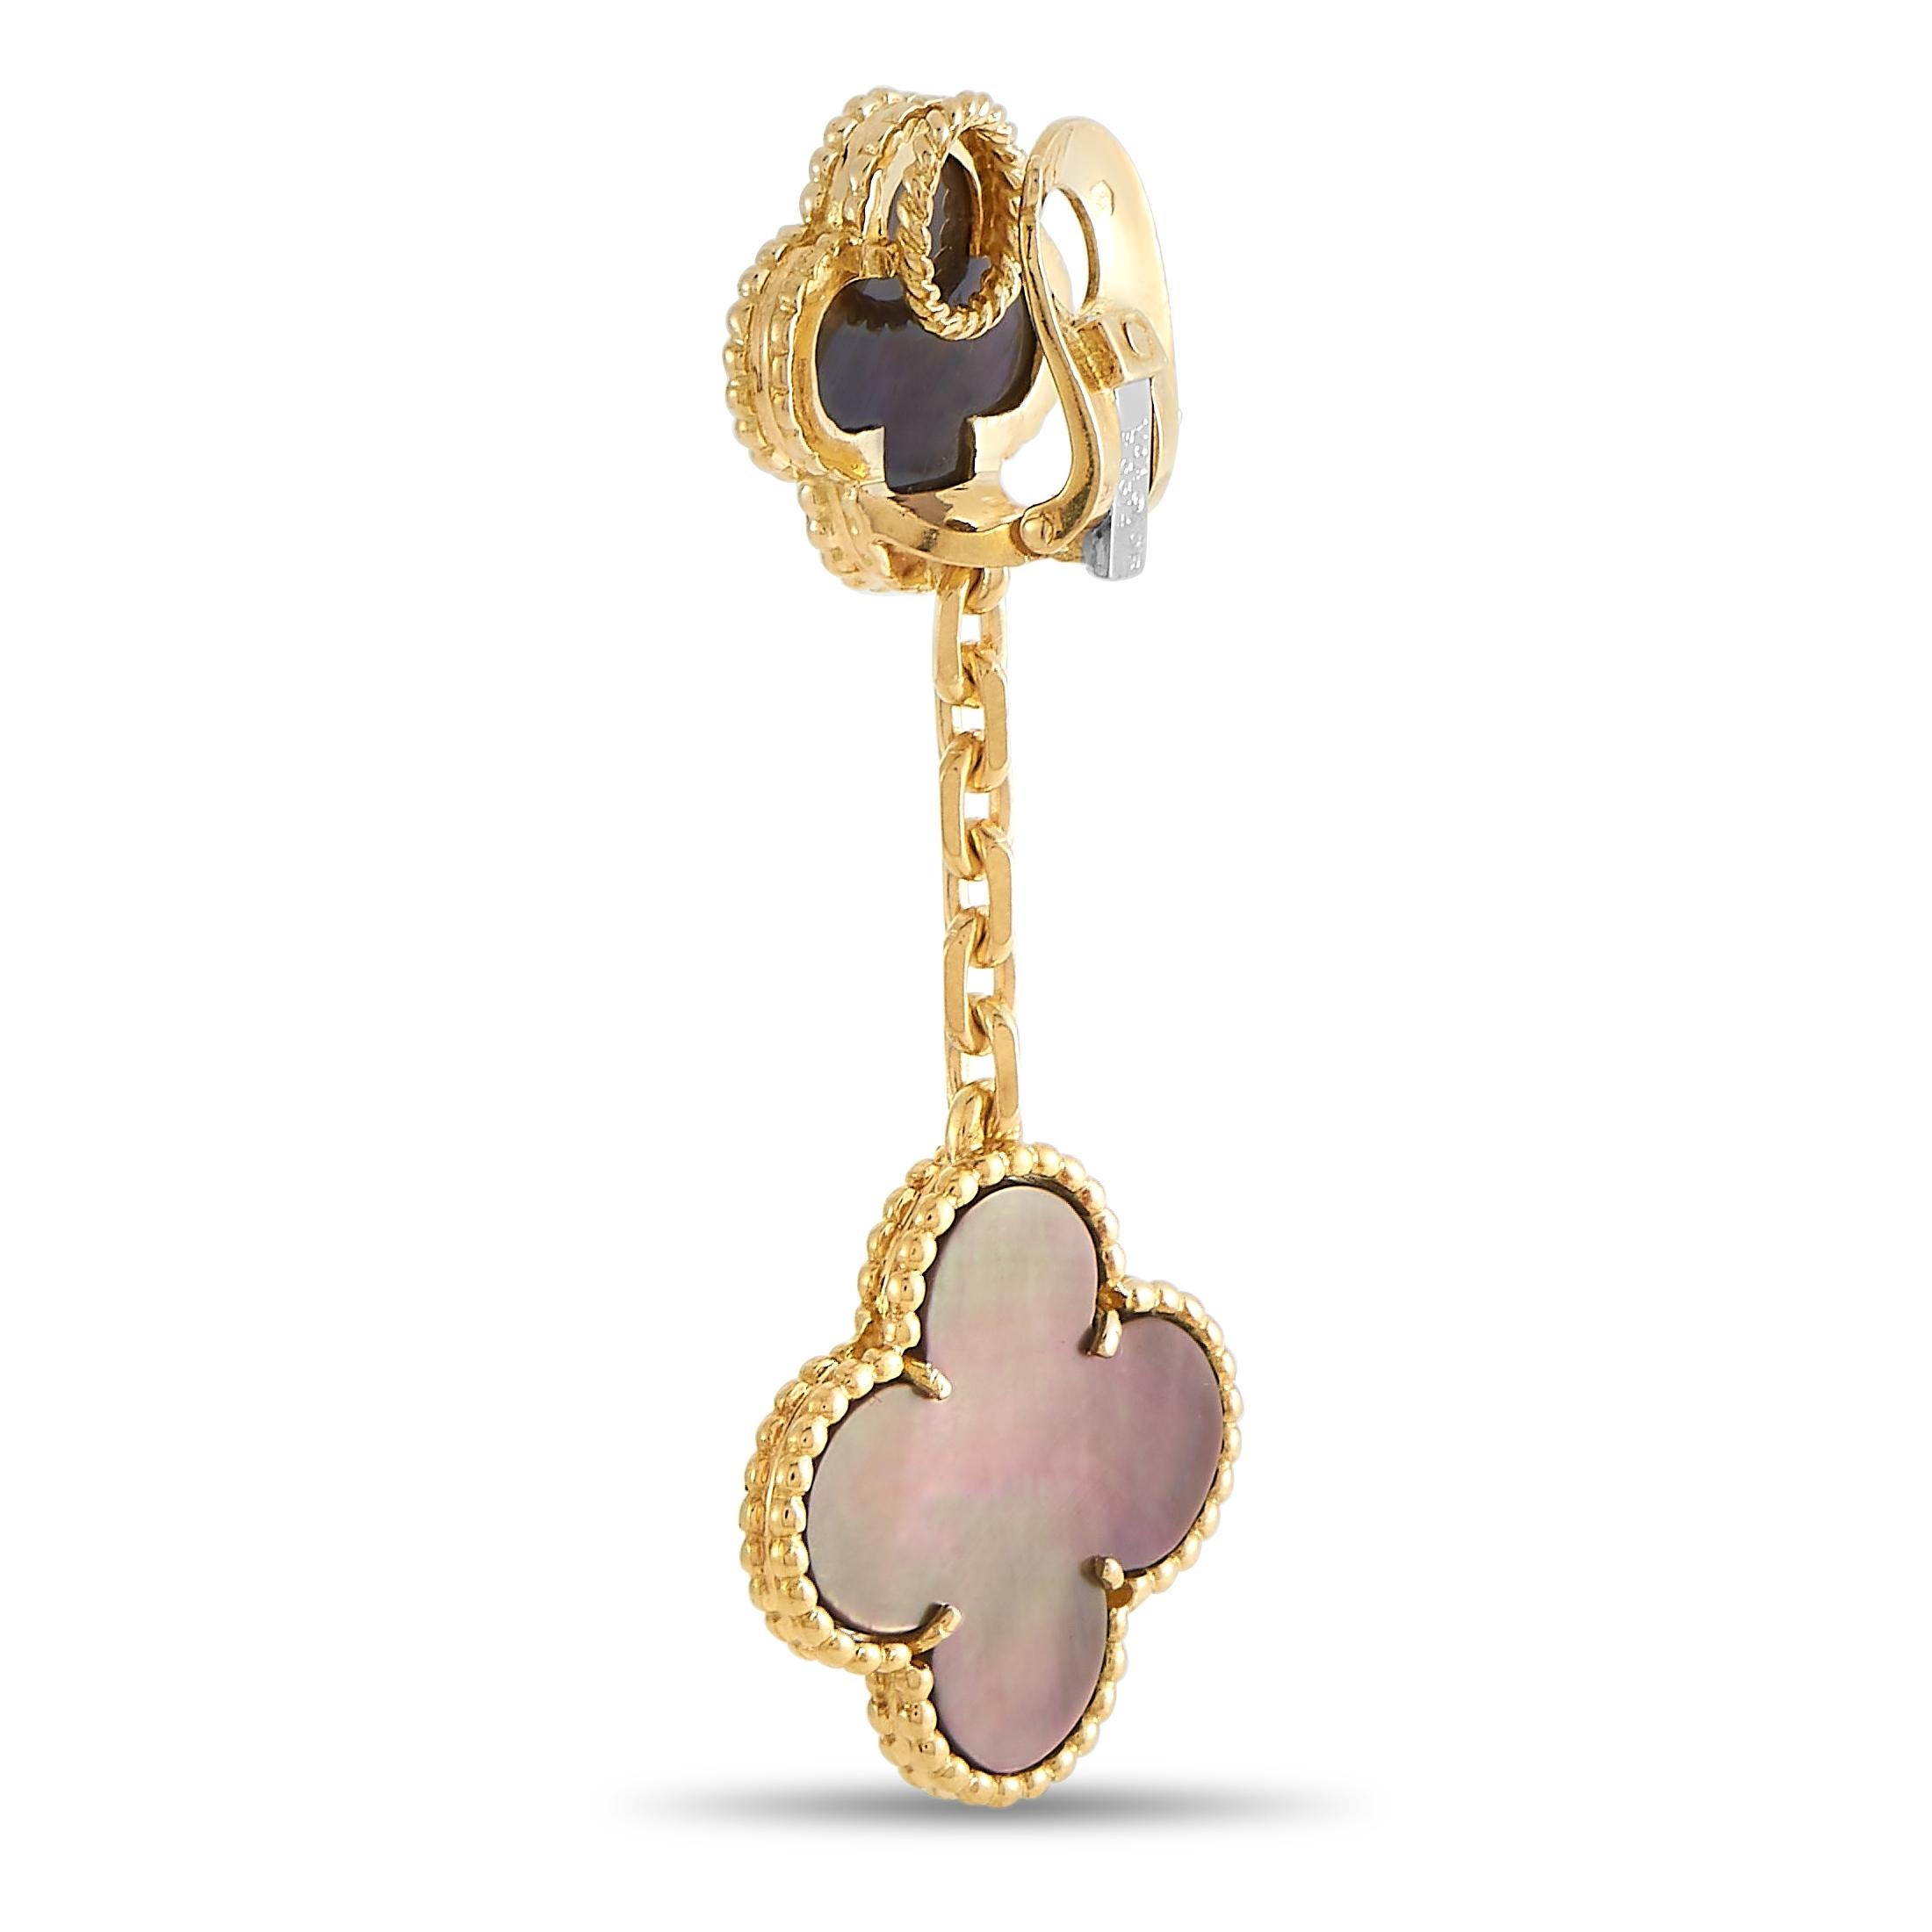 It doesn’t get more luxurious than a pair of Van Cleef & Arpels Alhambra earrings. Each one of these exquisitely crafted earrings features an 18K Yellow Gold setting that measures 2” long and 0.75” wide. A pair of captivating gray Mother of Pearl